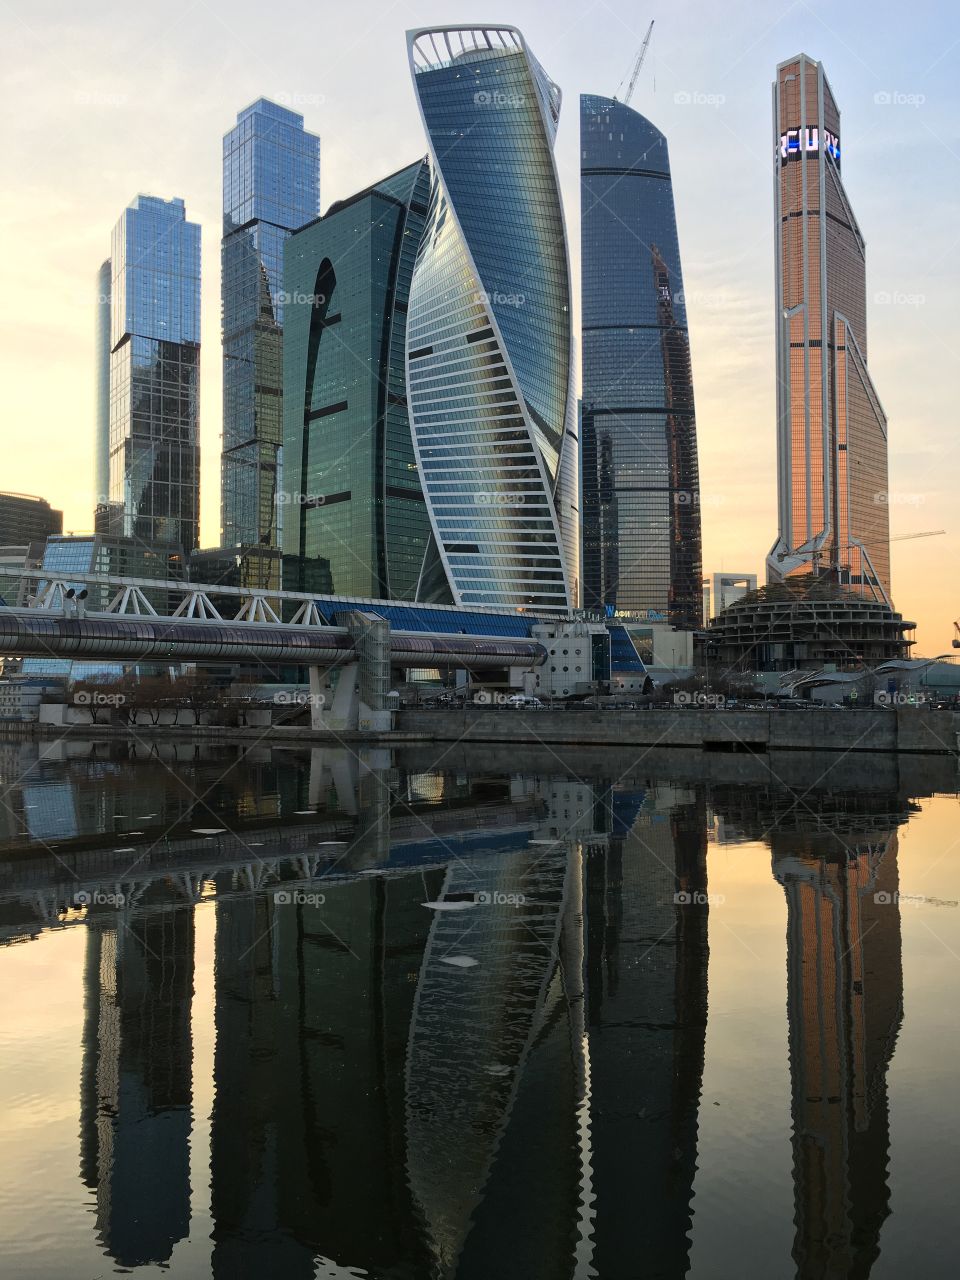 Moscow skyscrapers 